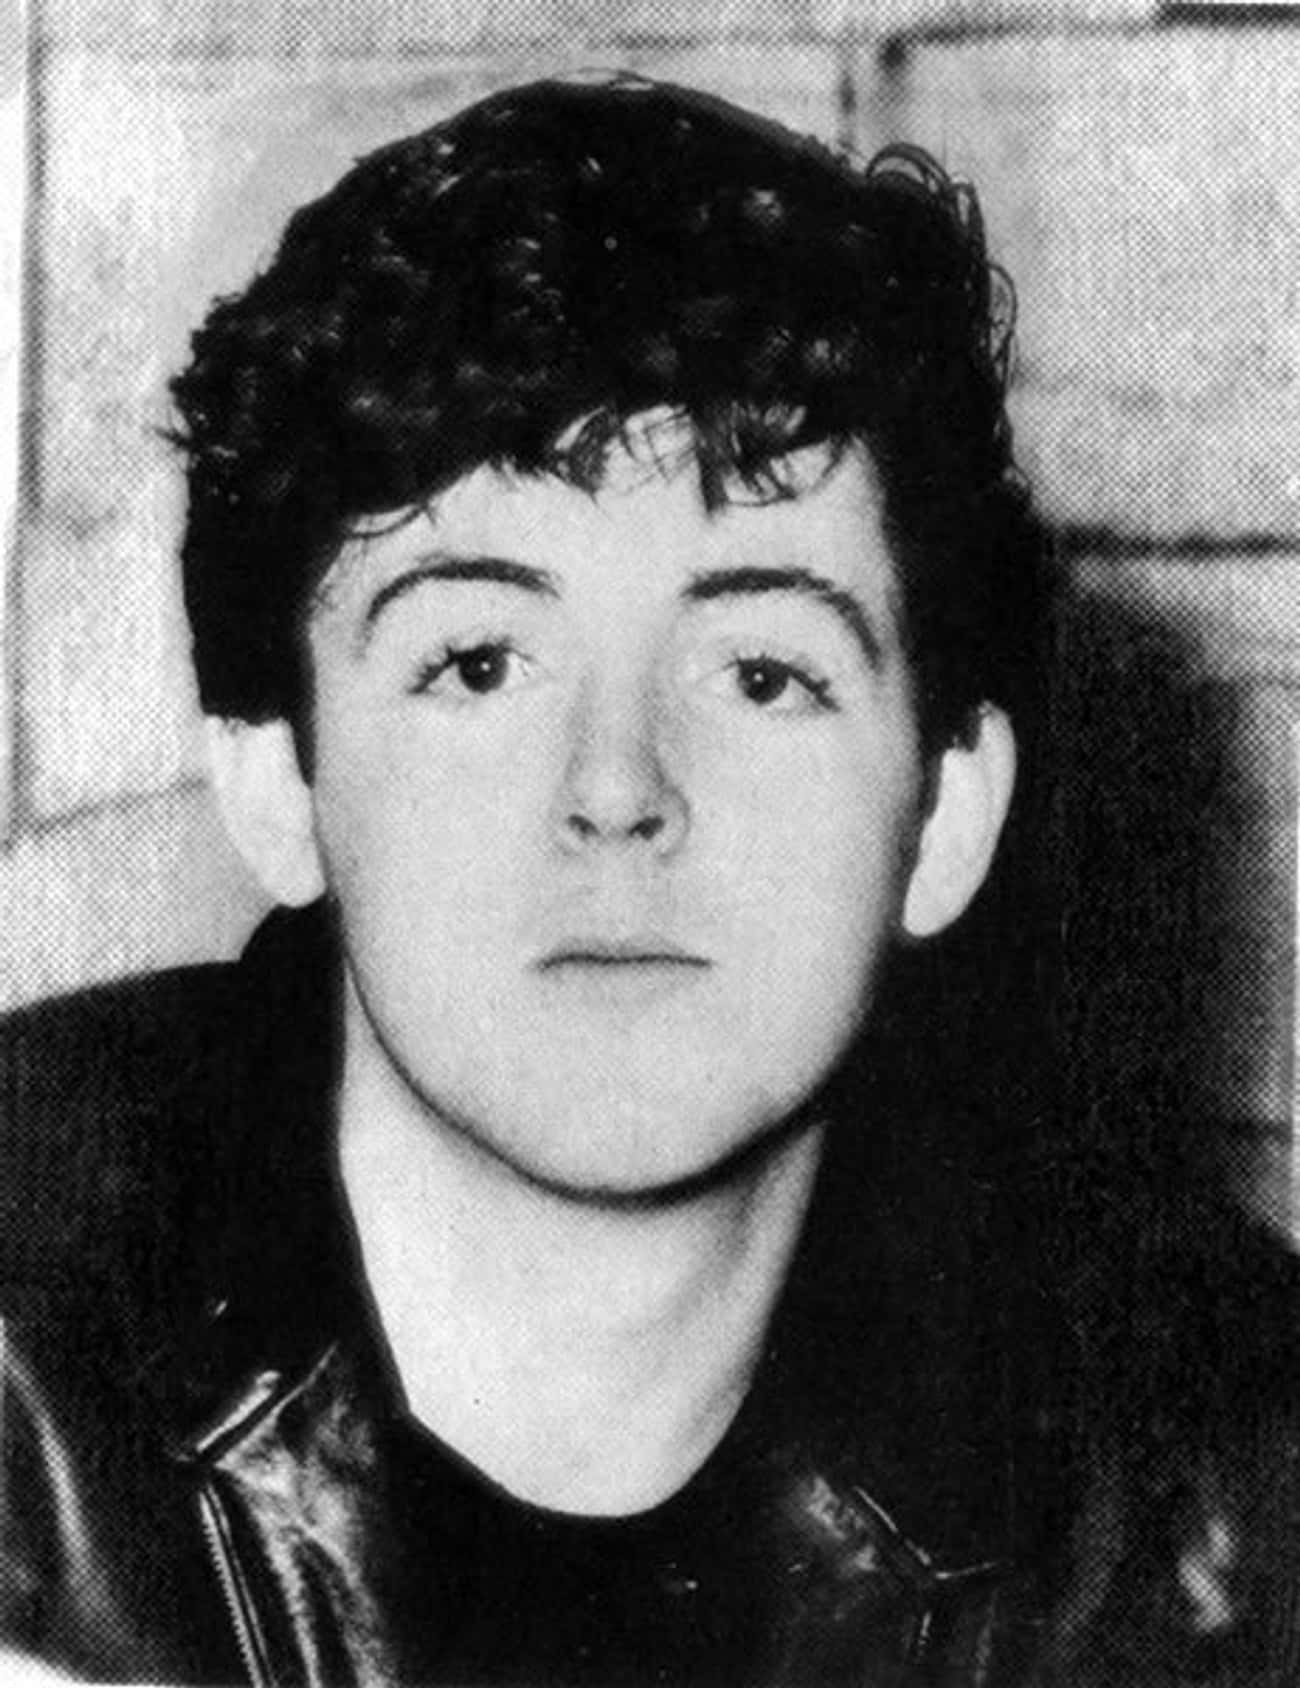 Young Paul McCartney in a Black Leather Jacket